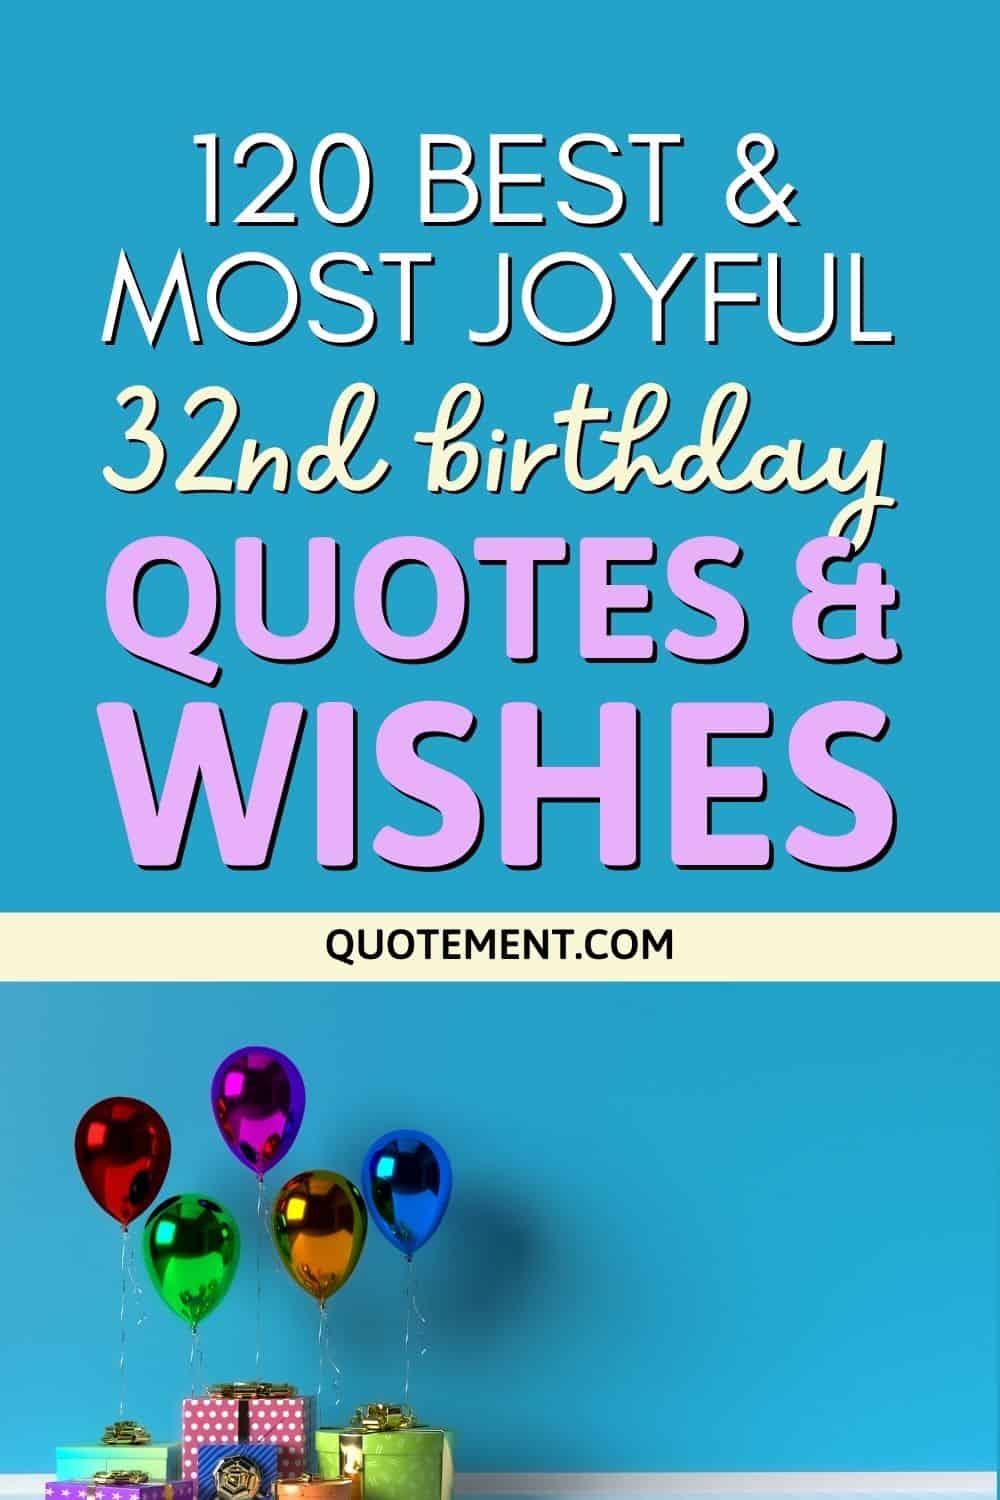 120 Best & Most Joyful 32nd Birthday Quotes & Wishes